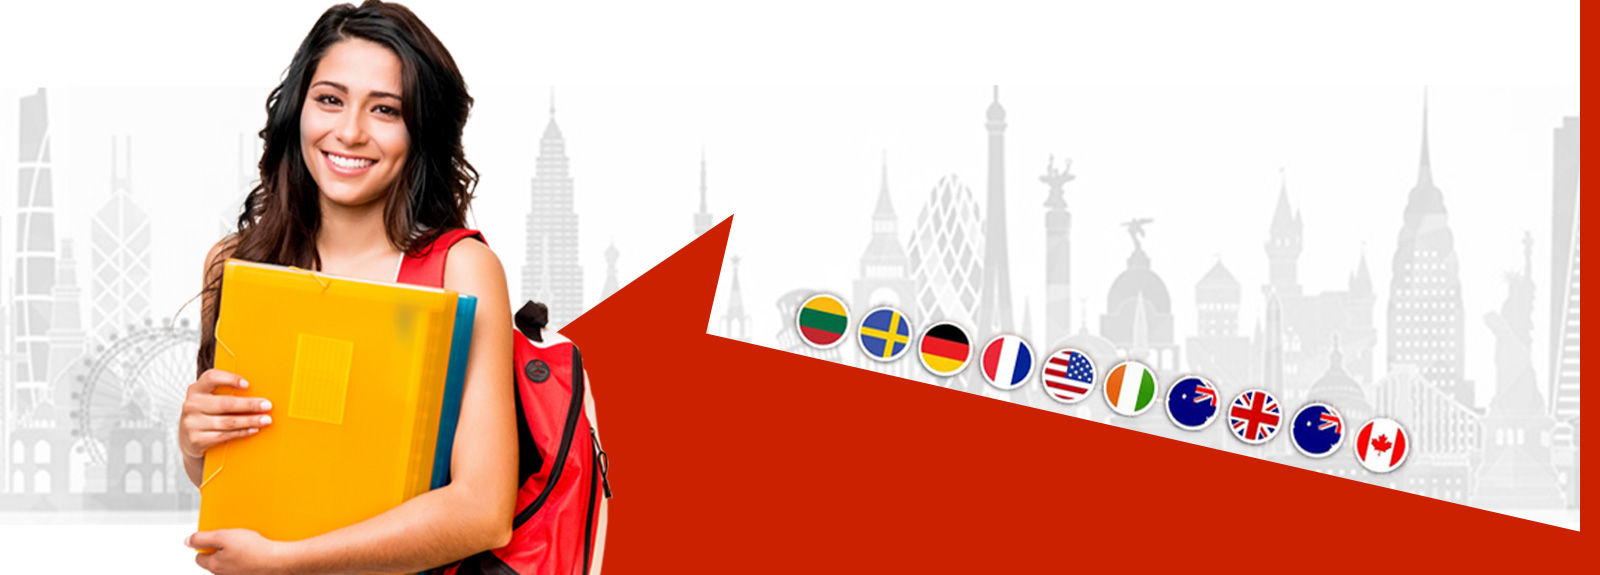 Study Abroad - Eduone International: Best Career Counselor In India